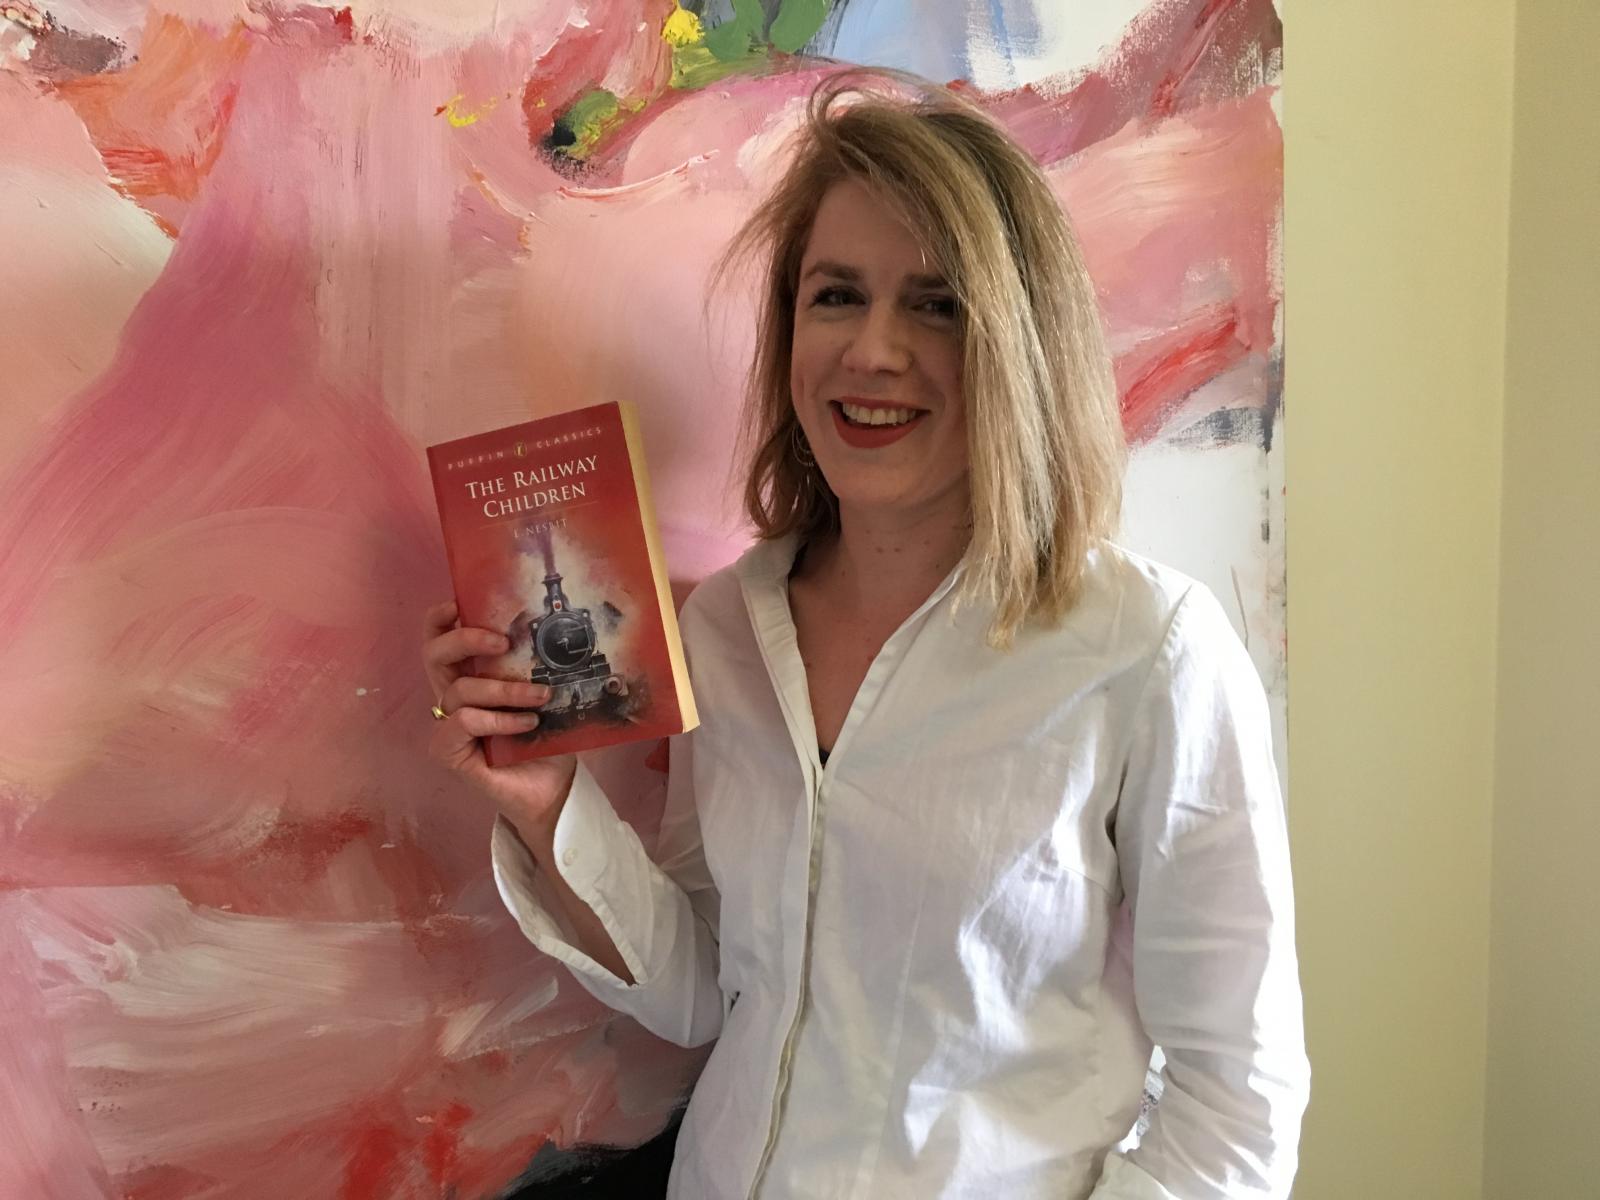 Dr Sophie Ratcliffe with her book suggestion for World Book Day